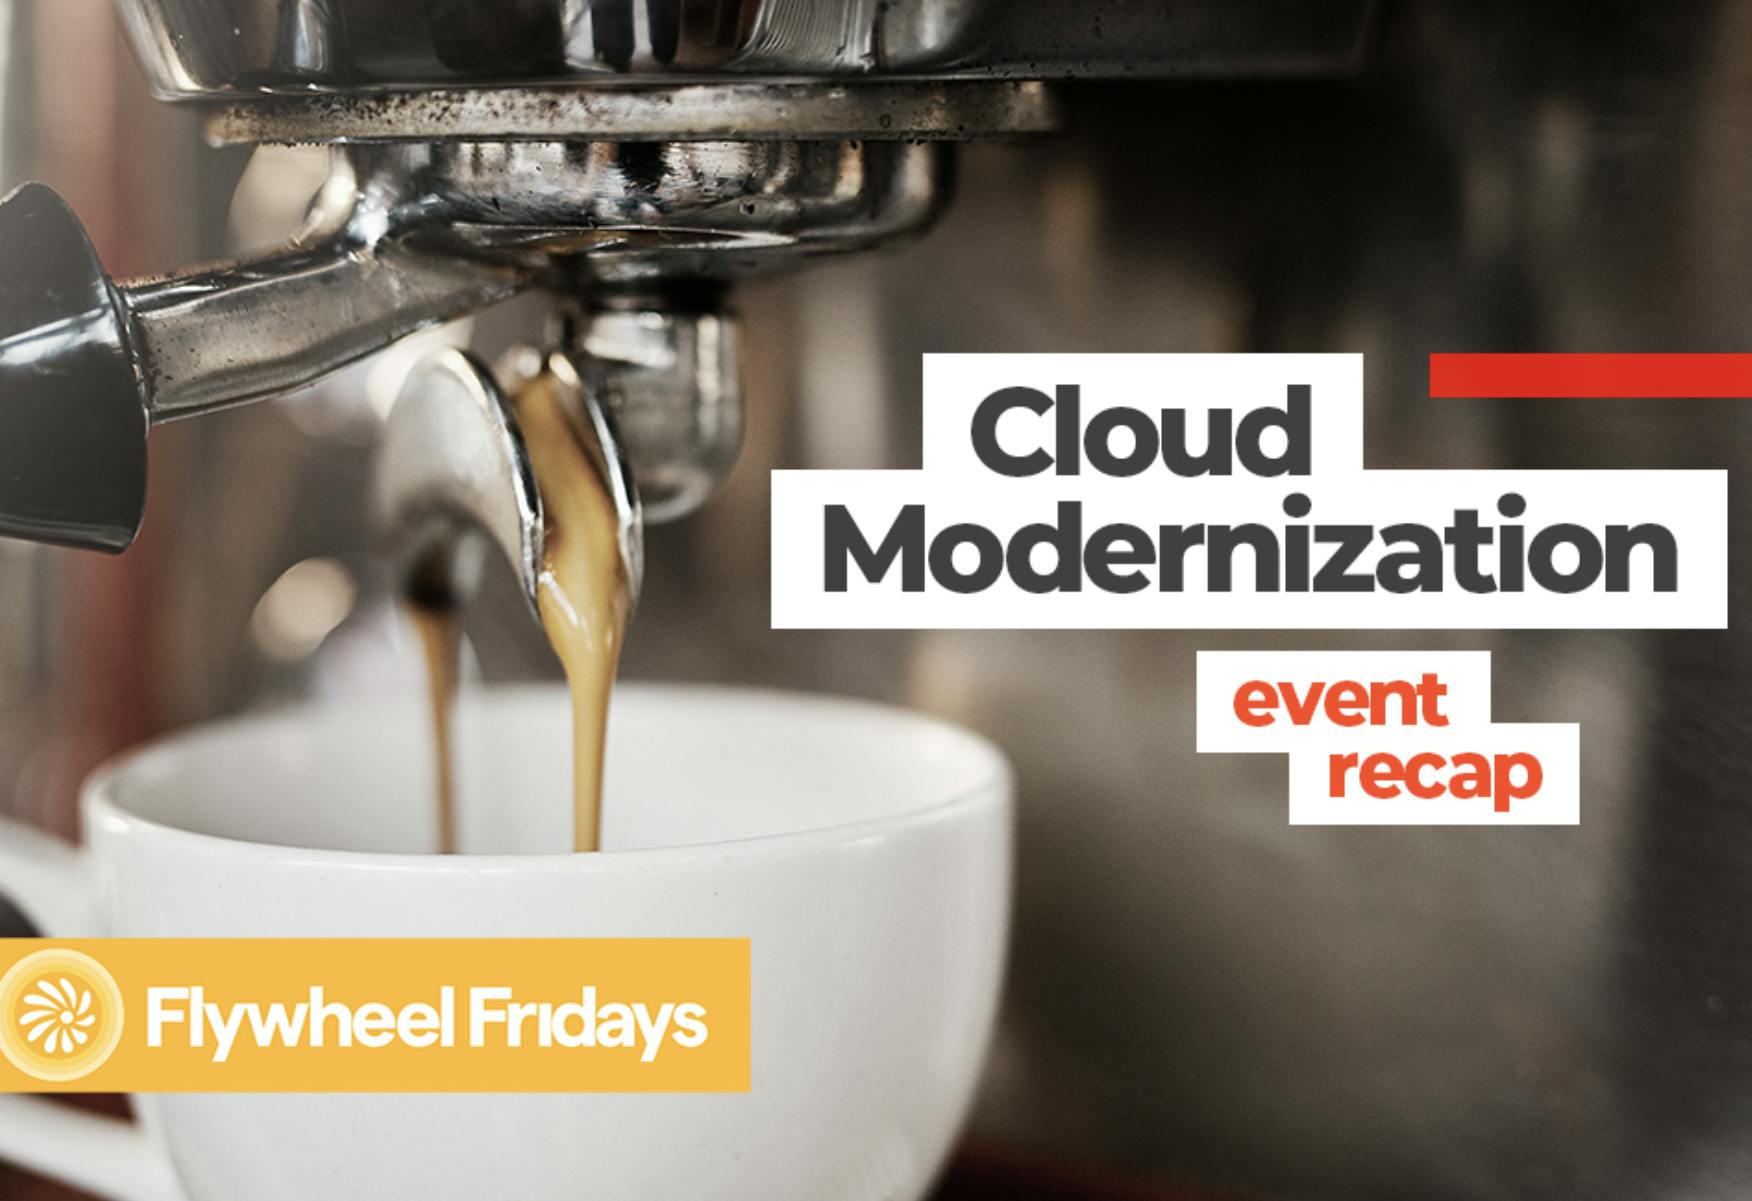 Image of espresso pouring into a cup with words "cloud modernization event recap" and "flywheel fridays" on the cover. Related to: GovCIO deep dives, cloud modernization, event recap.